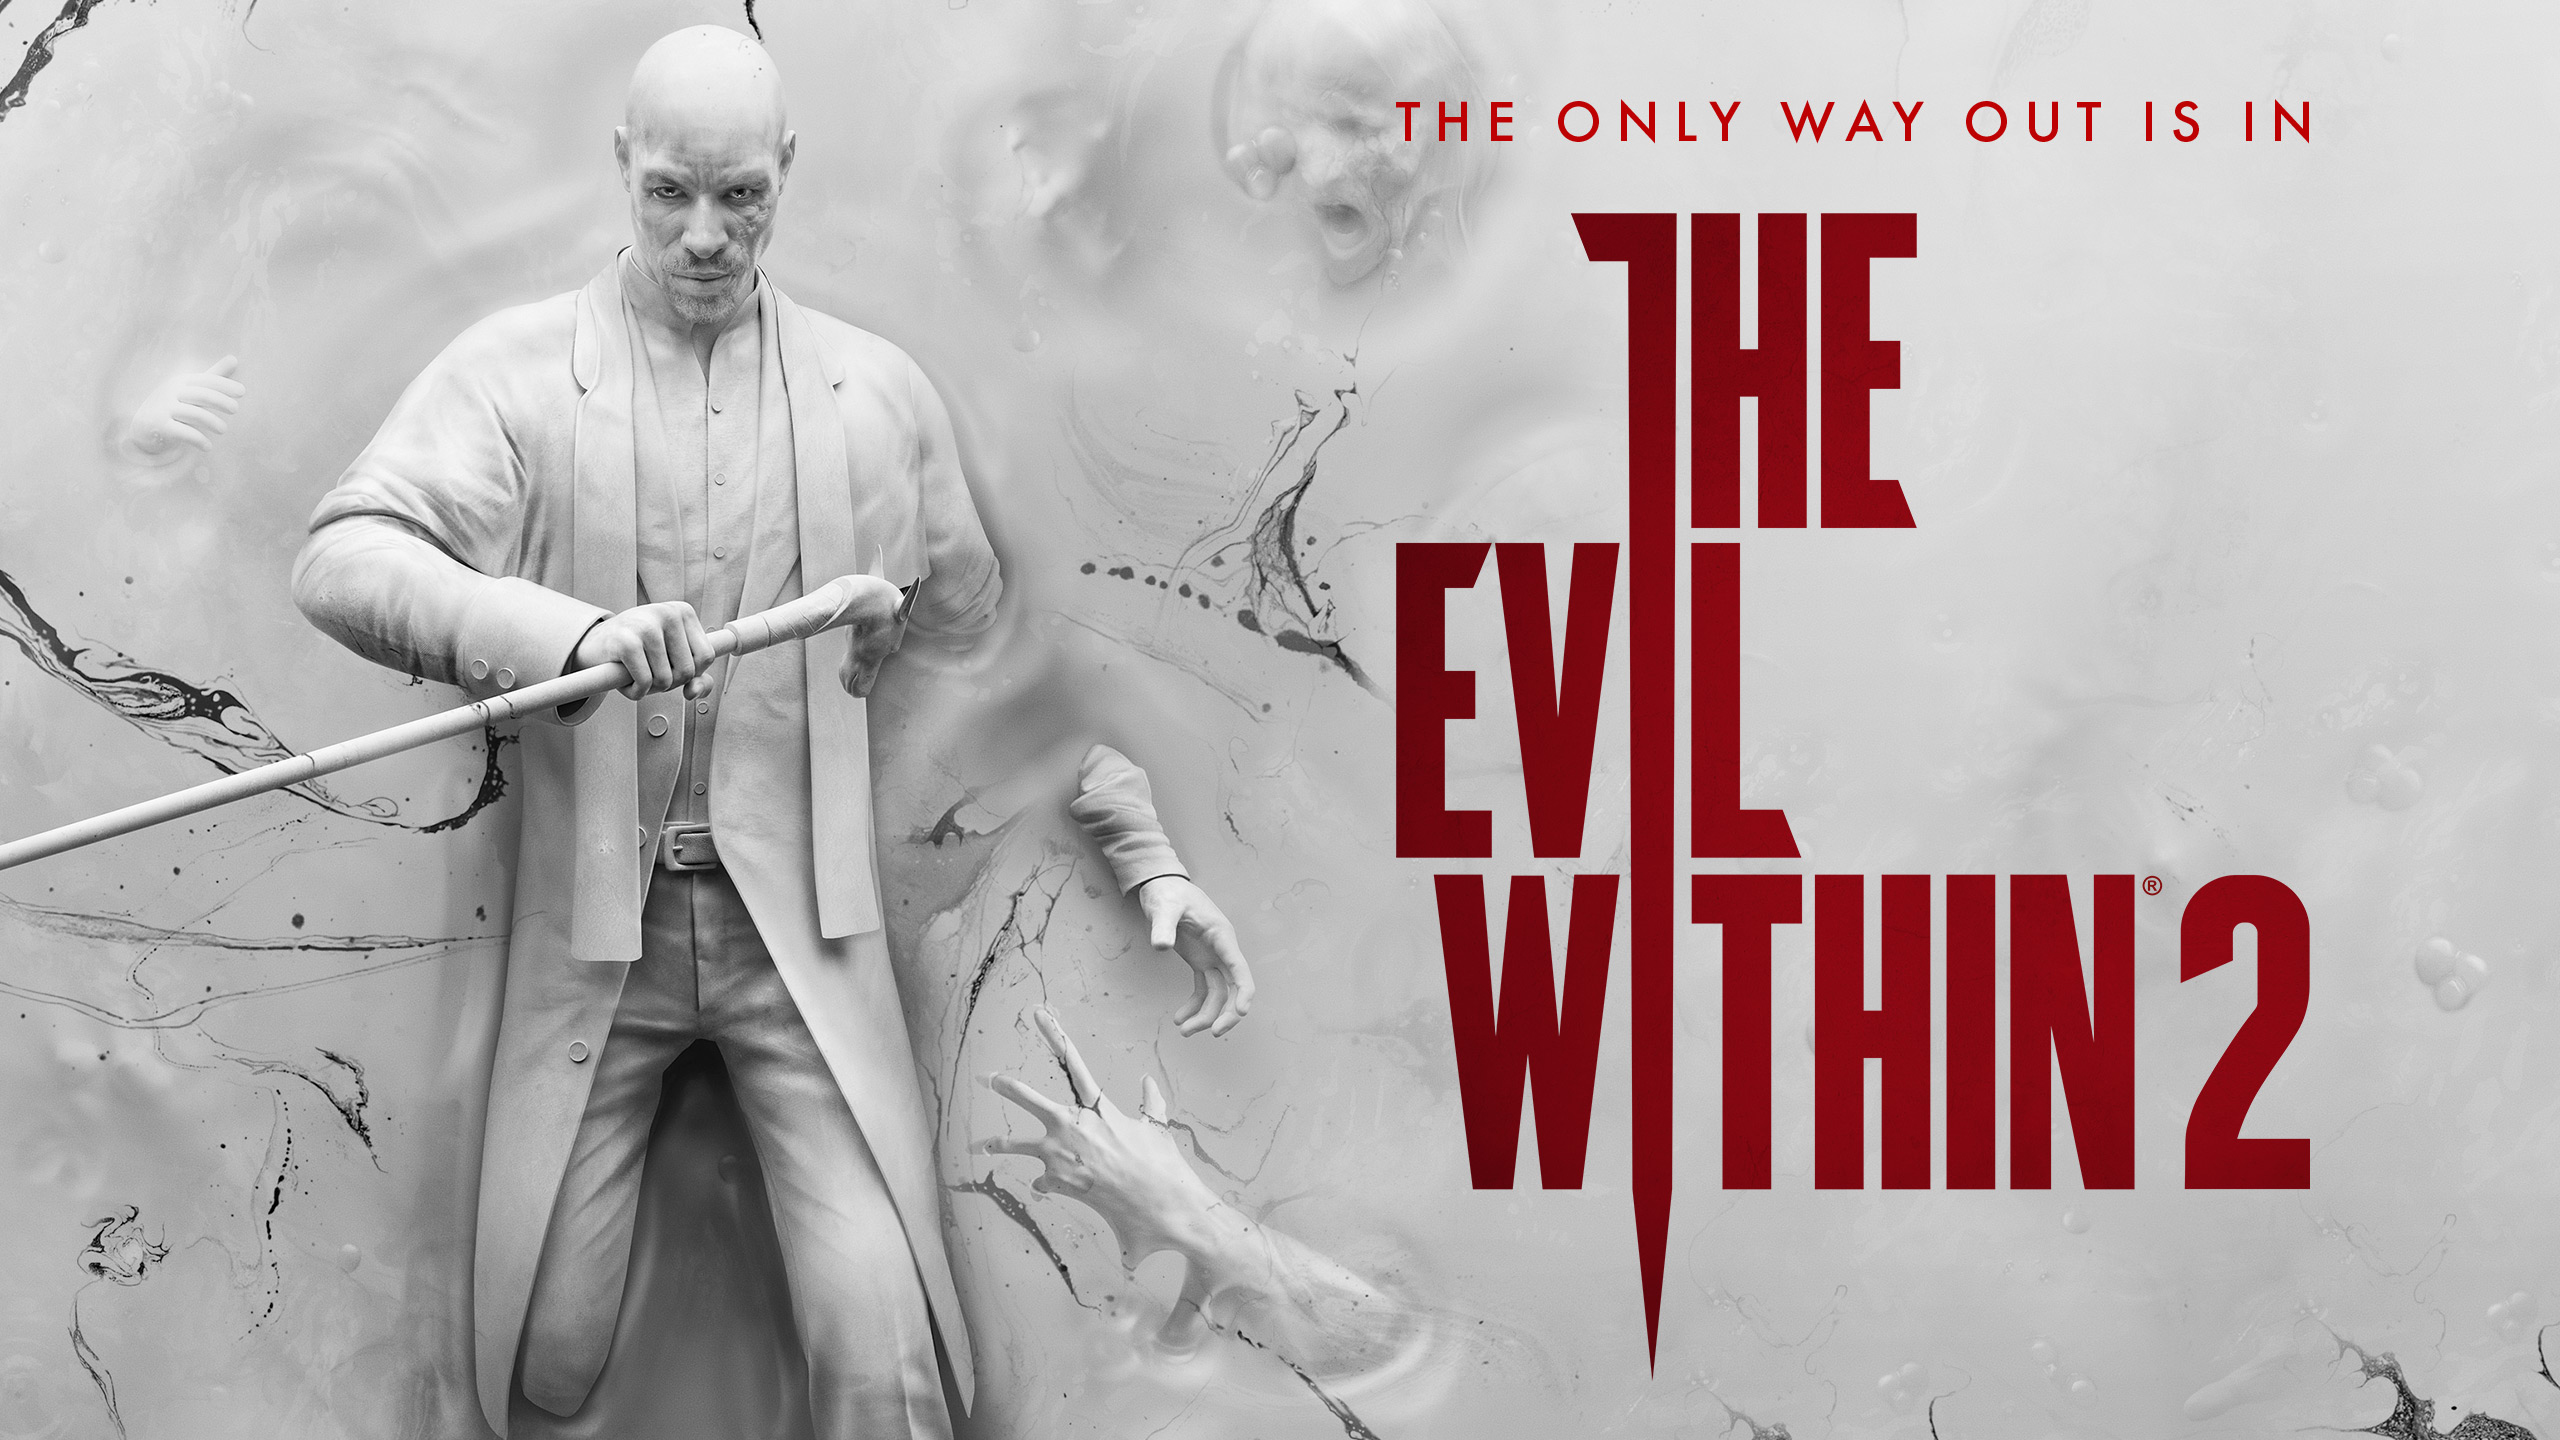 The Evil Within 2 Theodore Wallace9527917710 - The Evil Within 2 Theodore Wallace - Within, Wallace, Theodore, The, Evil